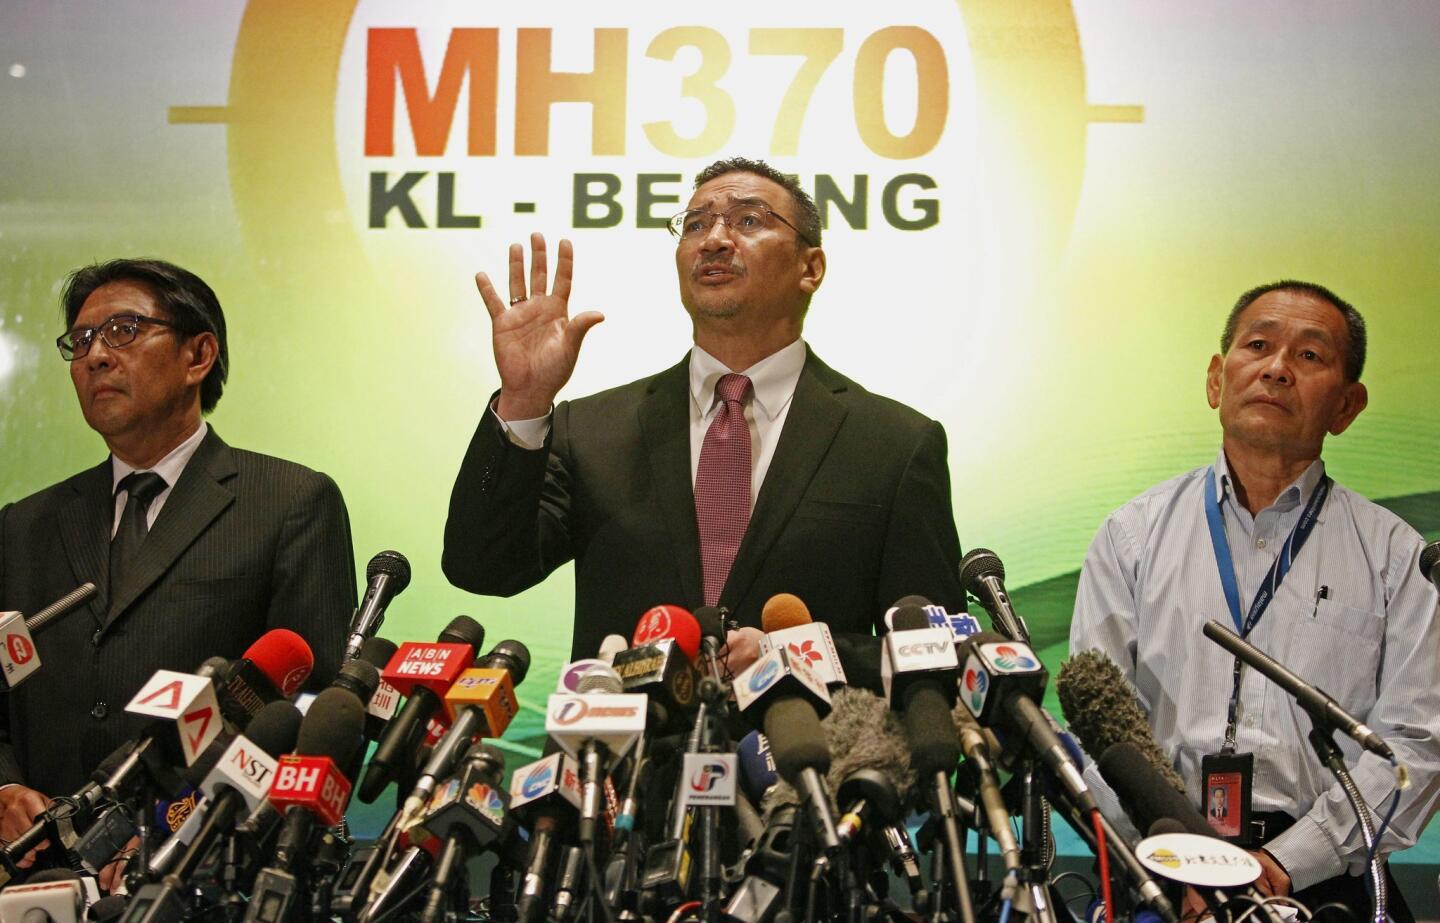 Malaysian Defense Minister and acting Transport Minister Hishammuddin Hussein (C), accompanied by Department Civil Aviation Director General Azharuddin Abdul Rahman (L), and Malaysian Airlines Group CEO Ahmad Jauhari Yahya (R), answers questions during a press conference at the Kuala Lumpur International Airport, in Sepang, outside Kuala Lumpur, Malaysia.